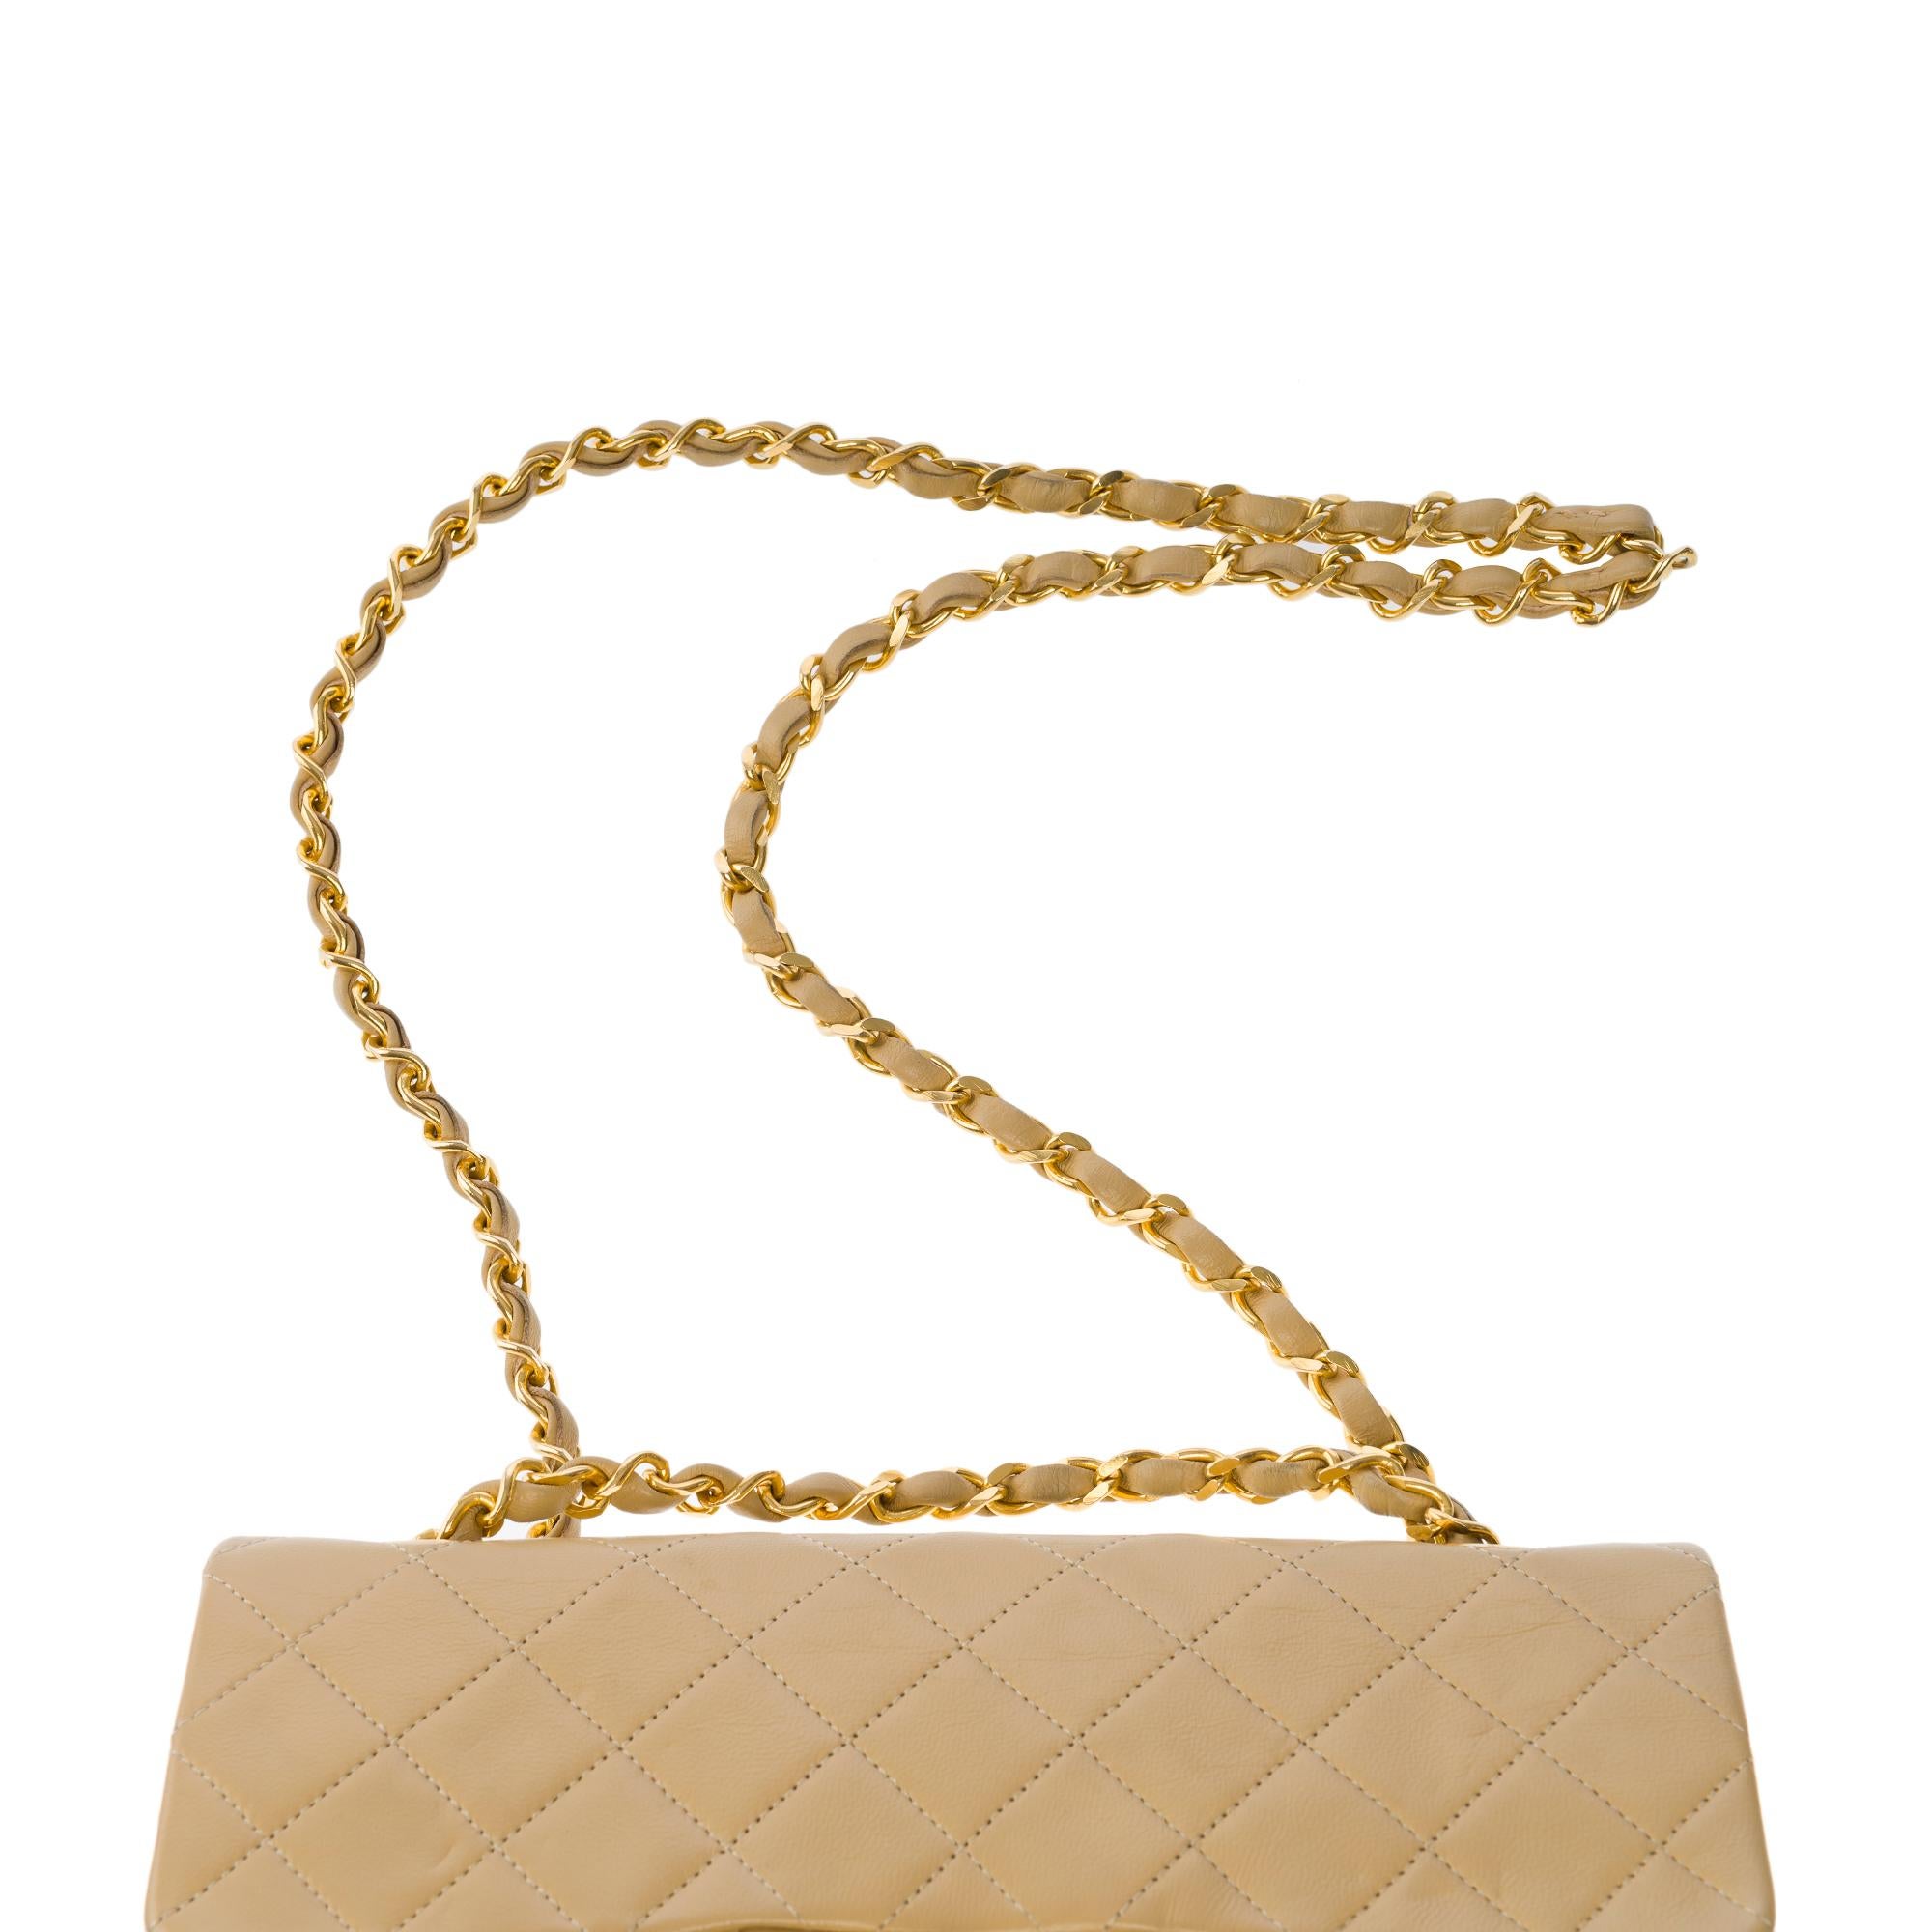 Chanel Timeless 23 cm double flap shoulder bag in beige quilted lambskin, GHW 3